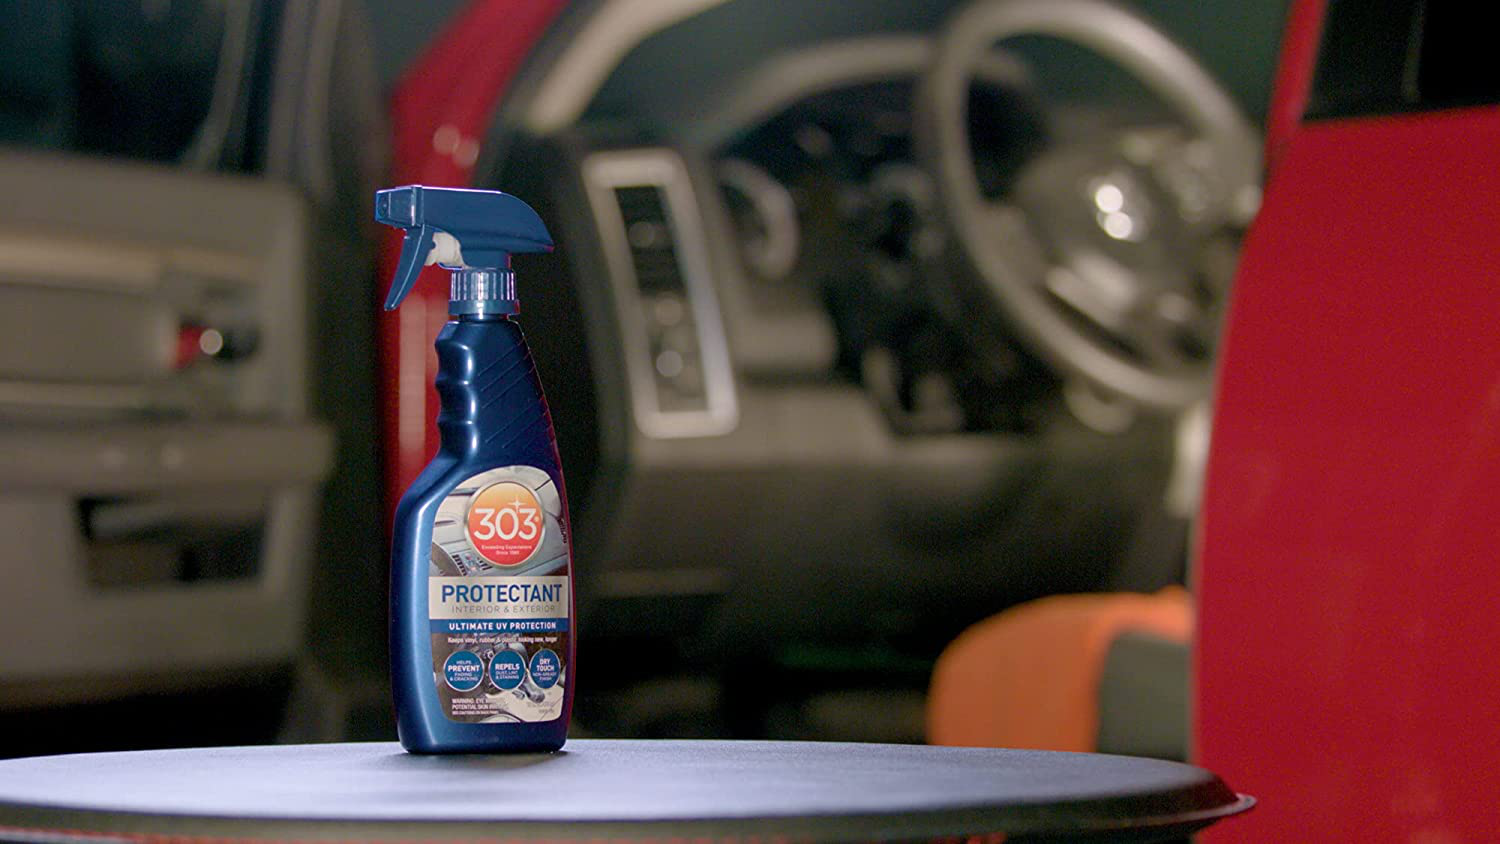 303 Protectant - Automotive Interior And Exterior - Ultimate UV Protection - Helps Prevent Fading And Cracking - Repels Dust, Lint, And Staining - Non Greasy Finish, 16 fl. oz. (30382CSR)